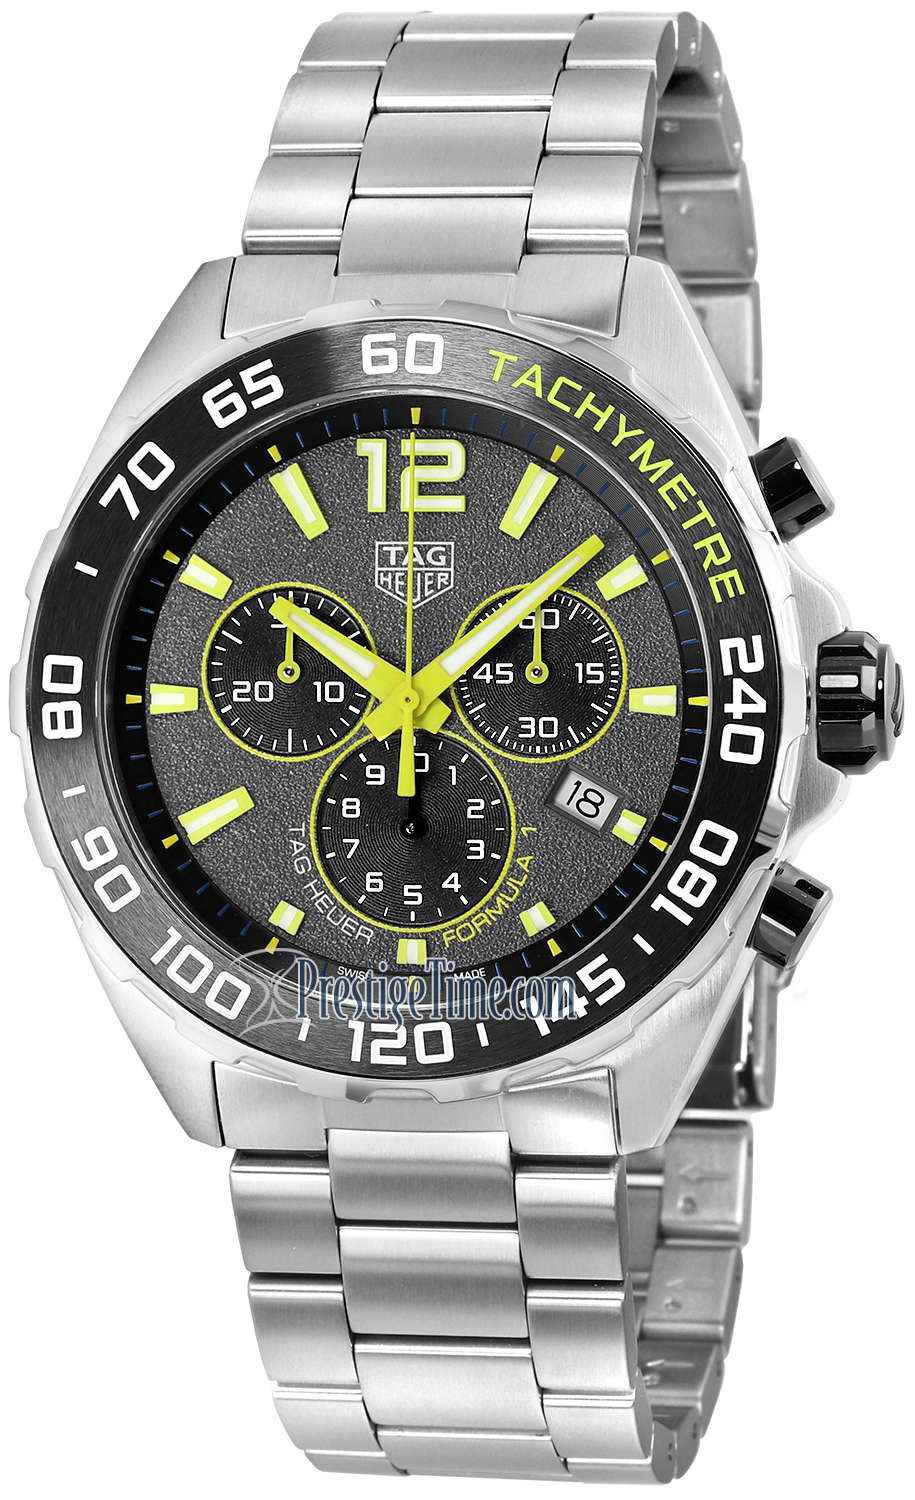 Tag Heuer Men's Formula 1 Chronograph Stainless Steel Watch